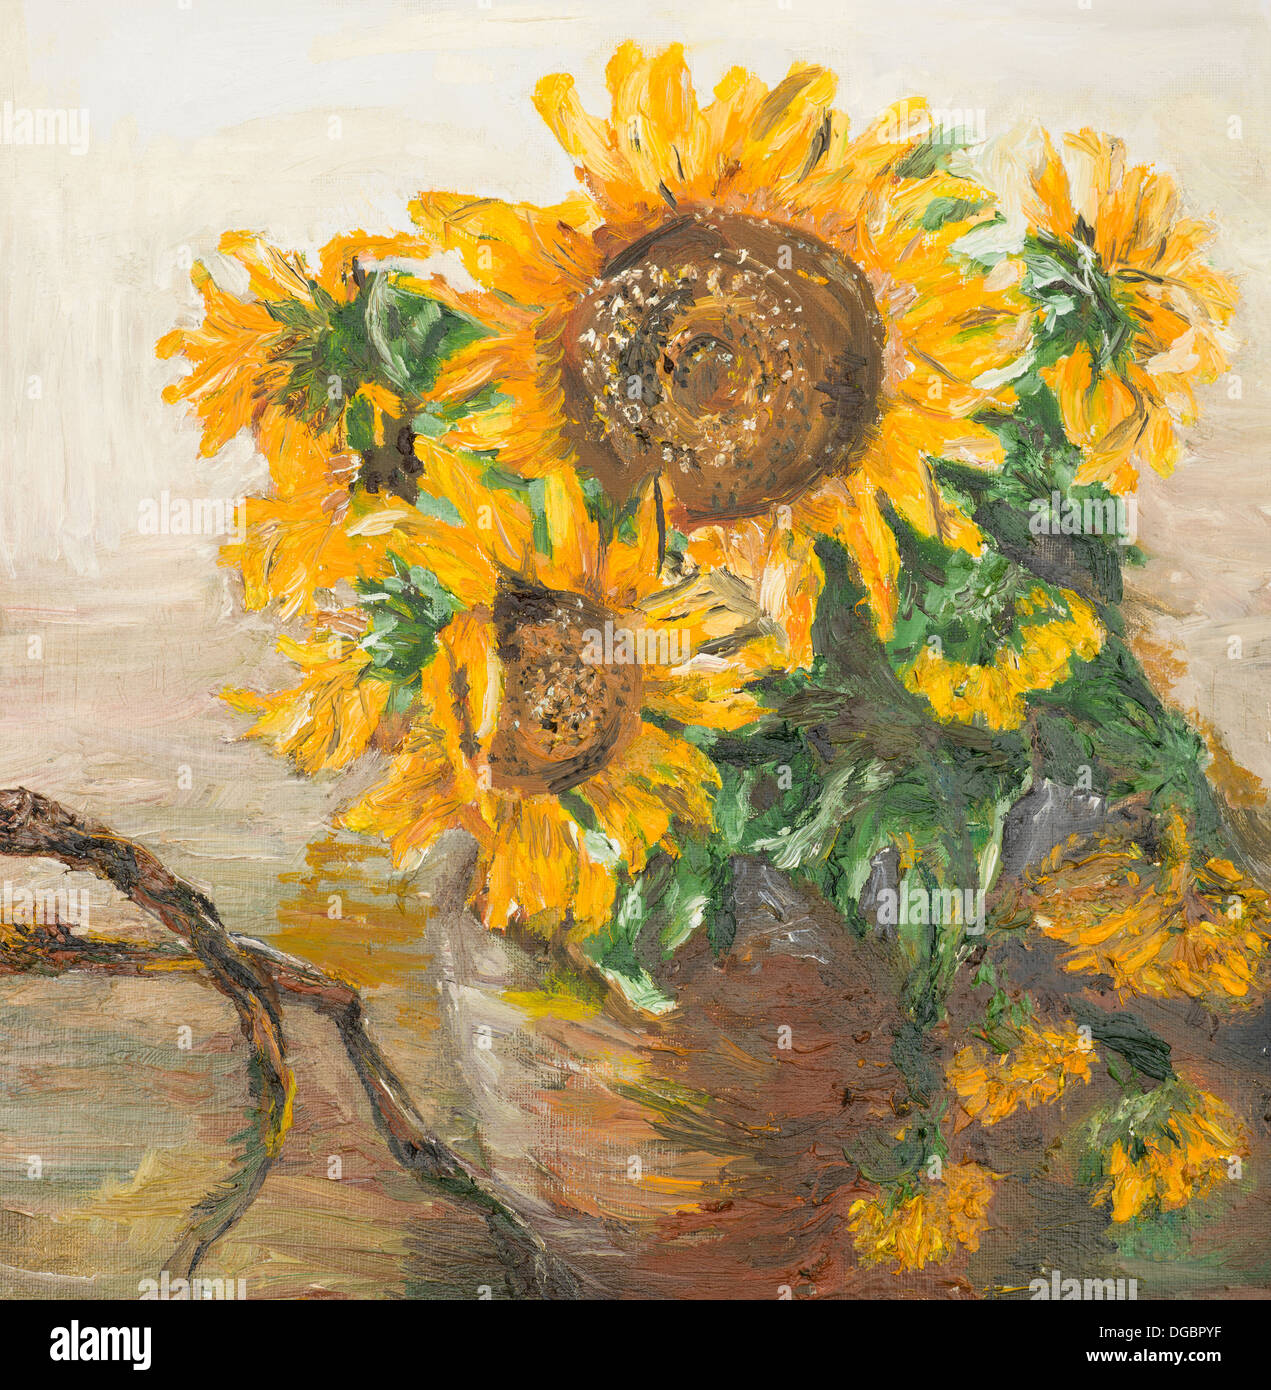 Oil Painting Illustrating Still Life With Sunflowers In Ceramic Vase Stock  Photo - Alamy